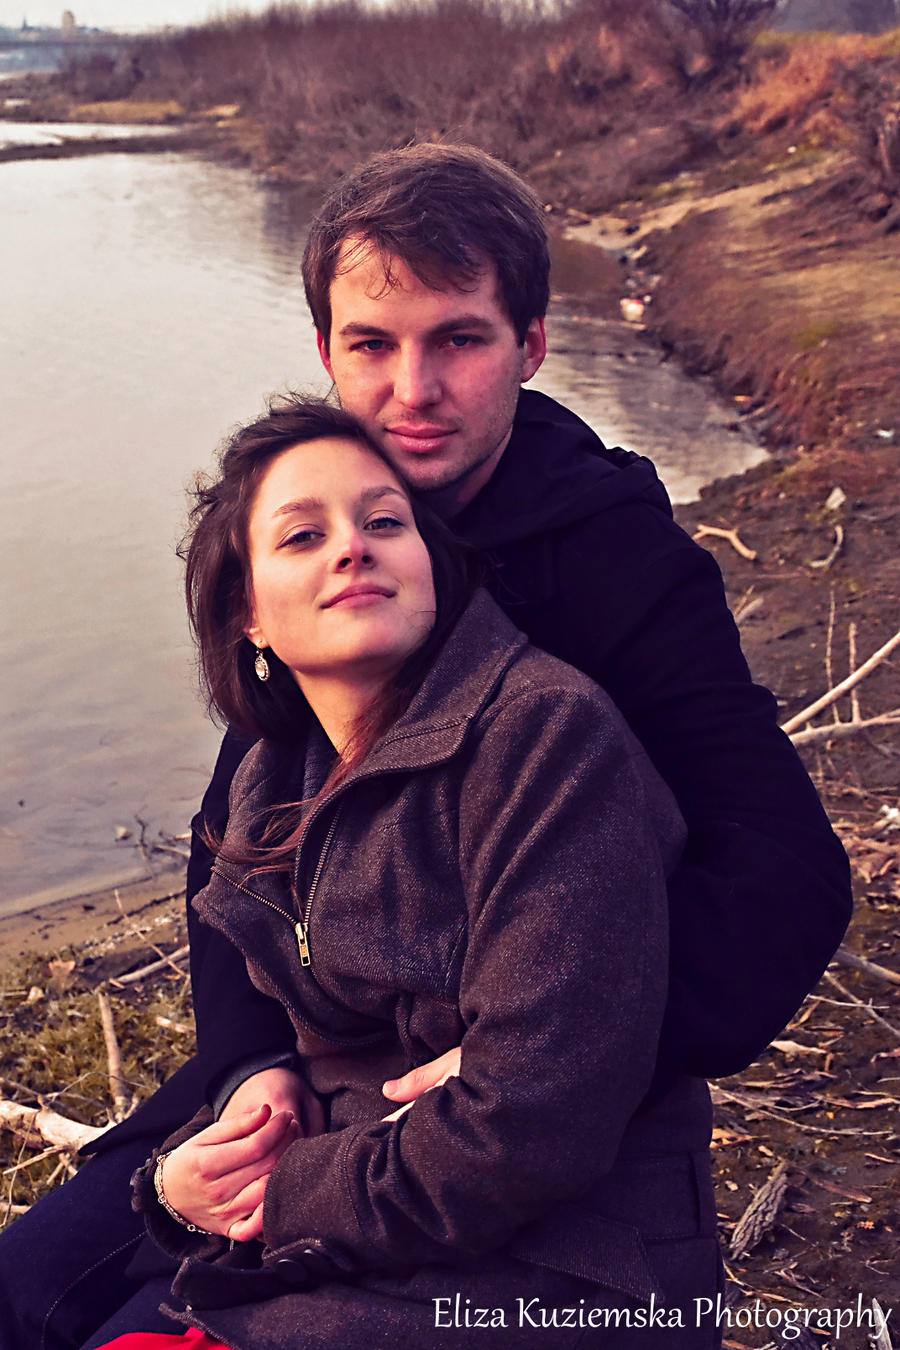 Justyna and Piotr8